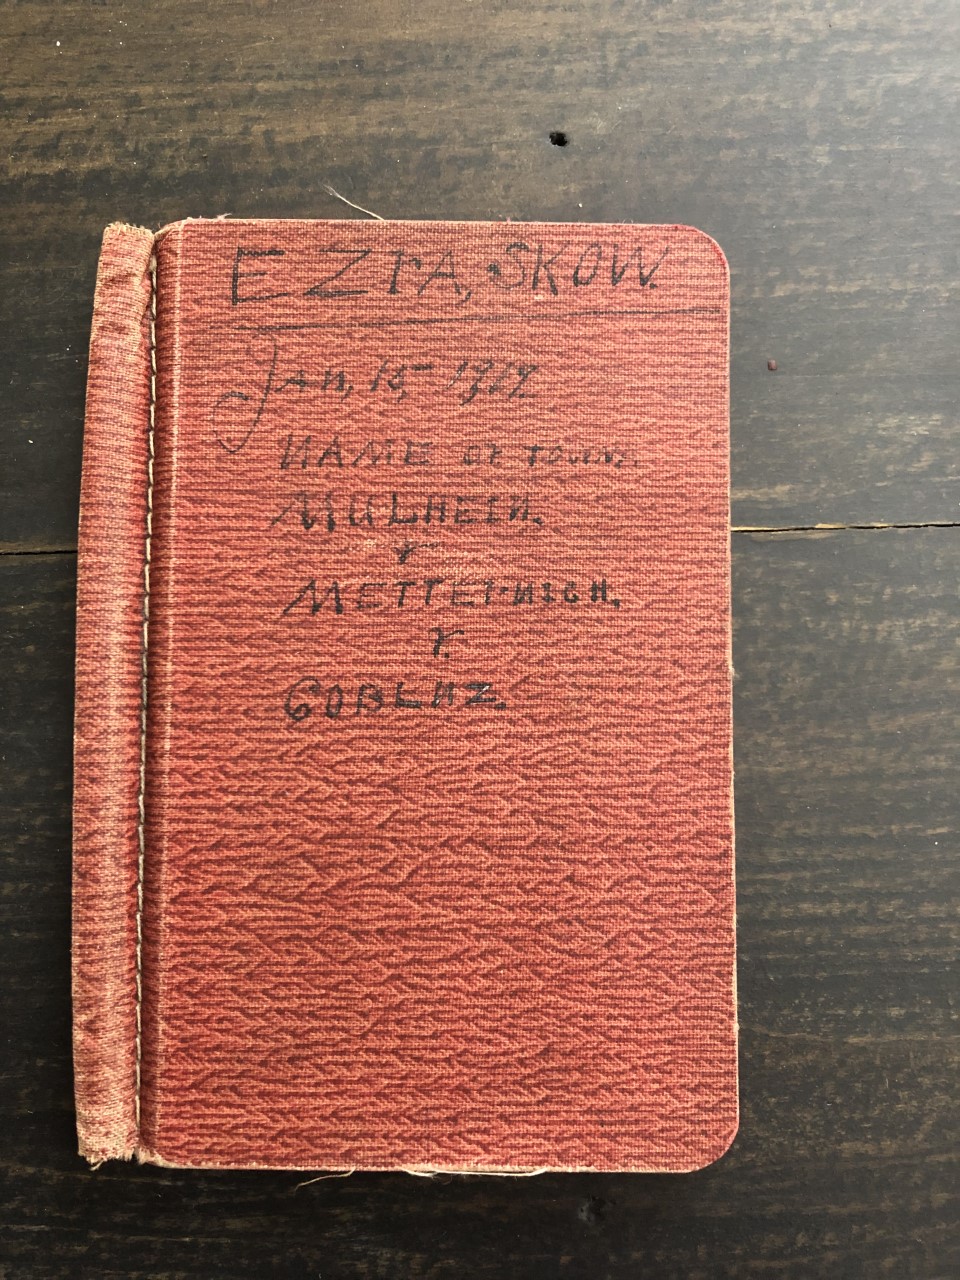 Image for 1919 Diary of American Soldier from the 56th Infantry, Ezra Skow, Stationed in Occupied Germany following WWI, Describing the Duties and Daily Life of a US Soldier